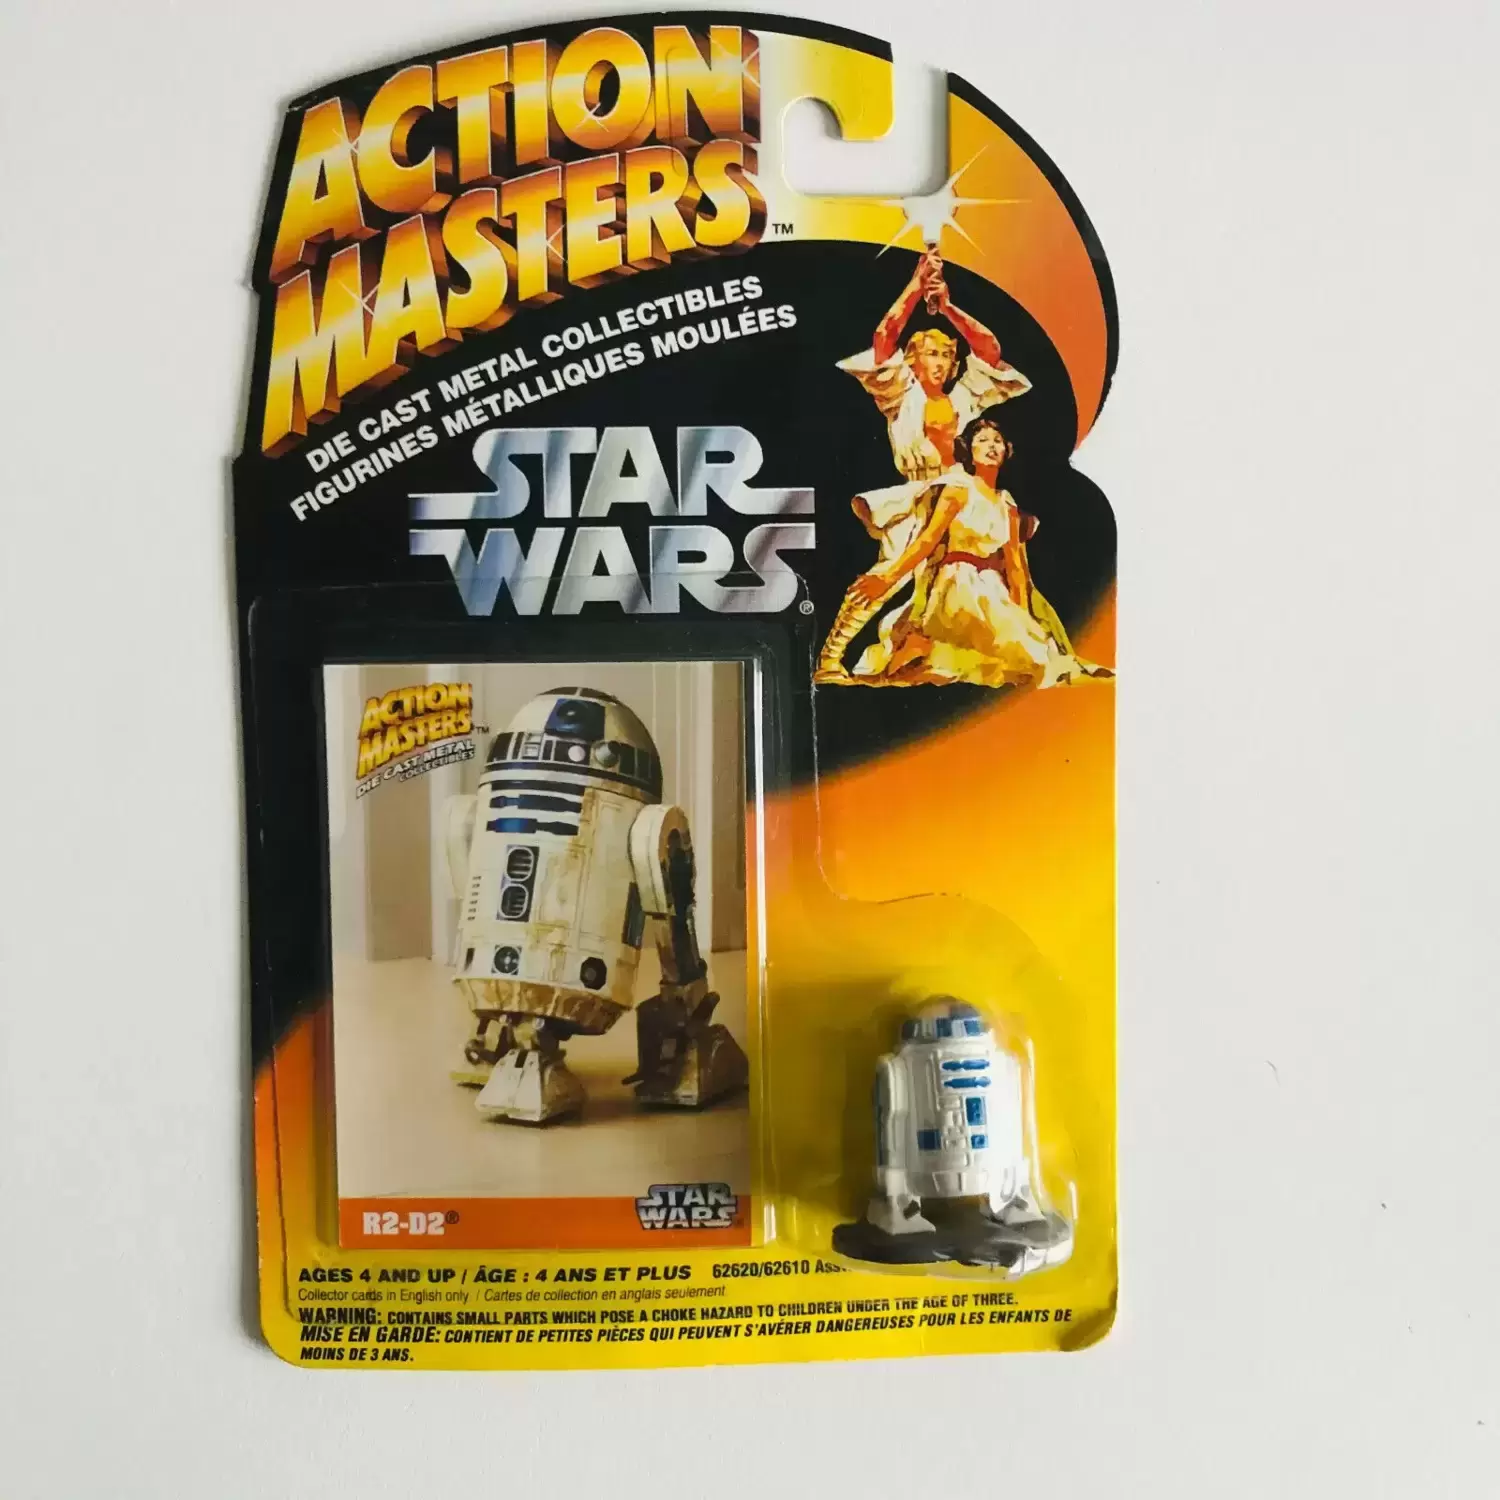 Action Masters - Die Cast Metal Collectibles - Star Wars - R2-D2